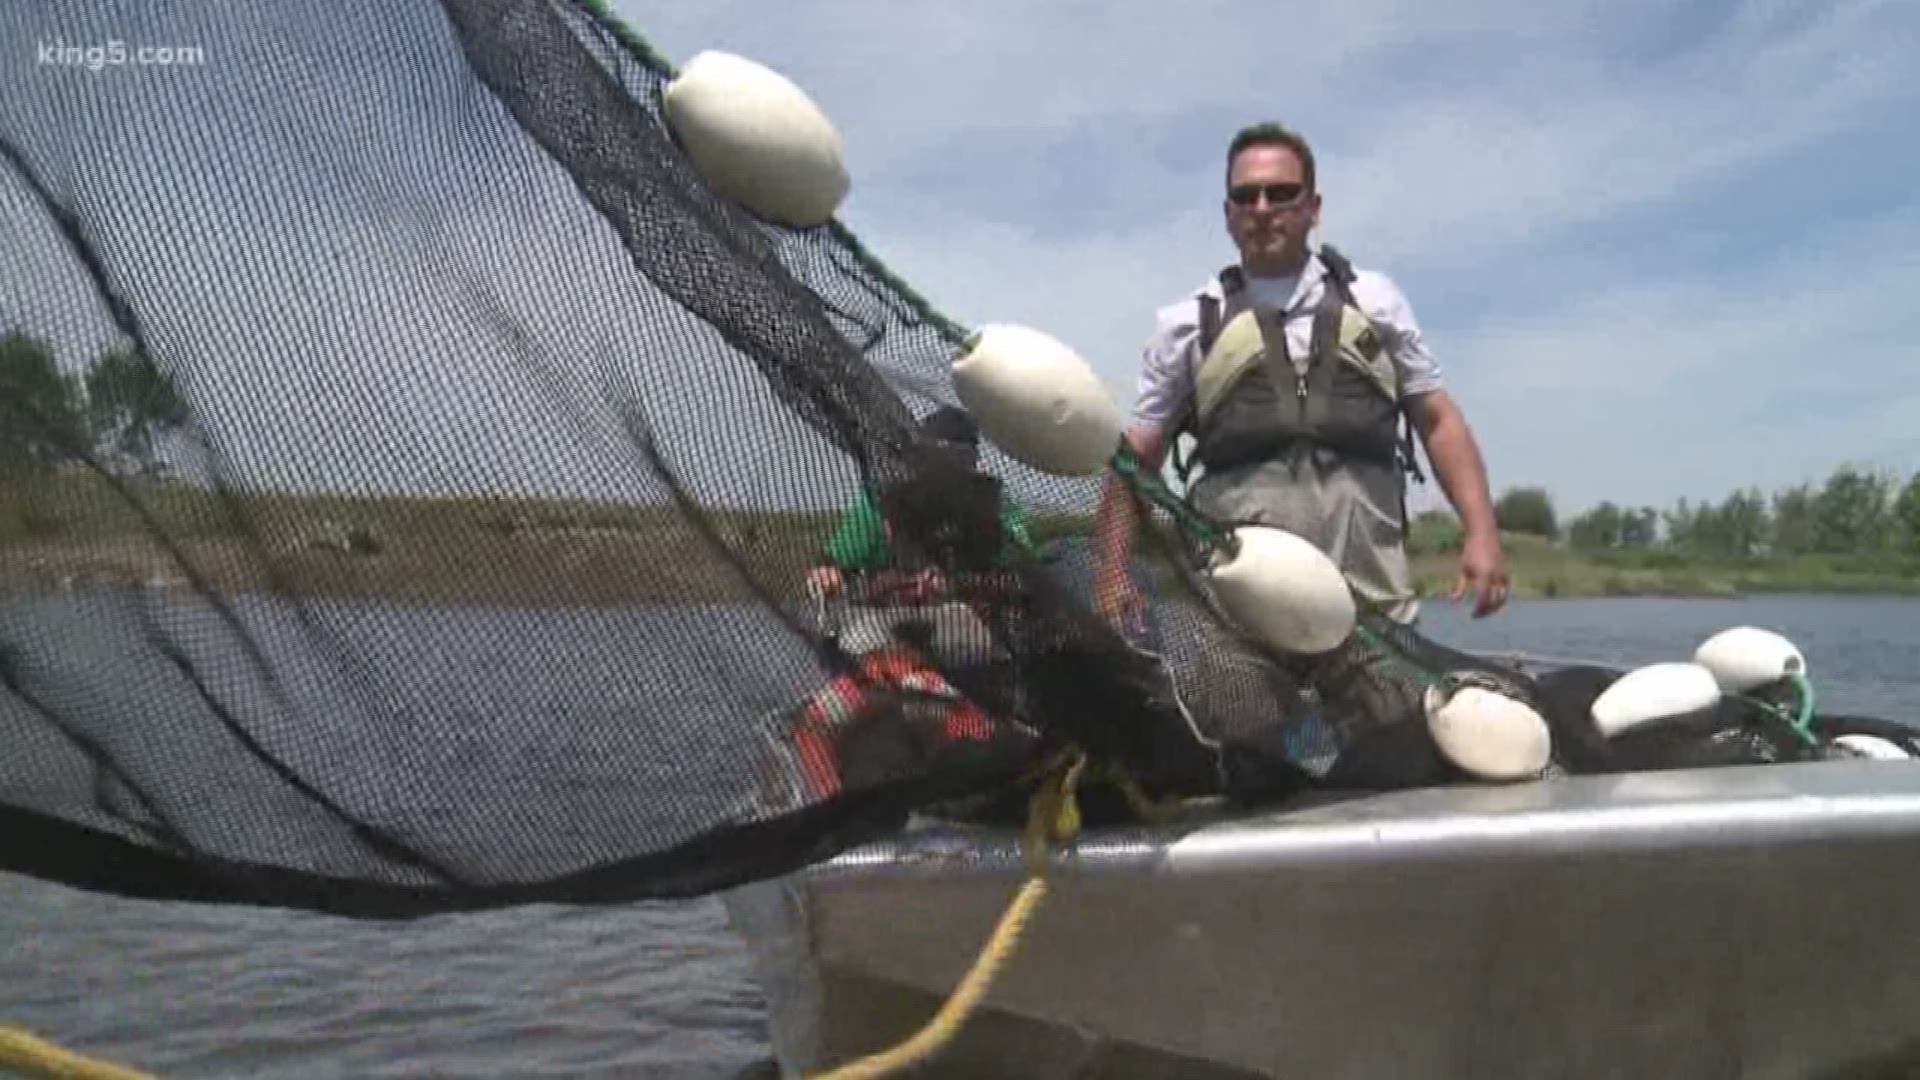 Scientists working to restore salmon habitat around the Snohomish River Estuary estimate they need $1.5 billion to finish the work. KING 5's Alison Morrow reports.